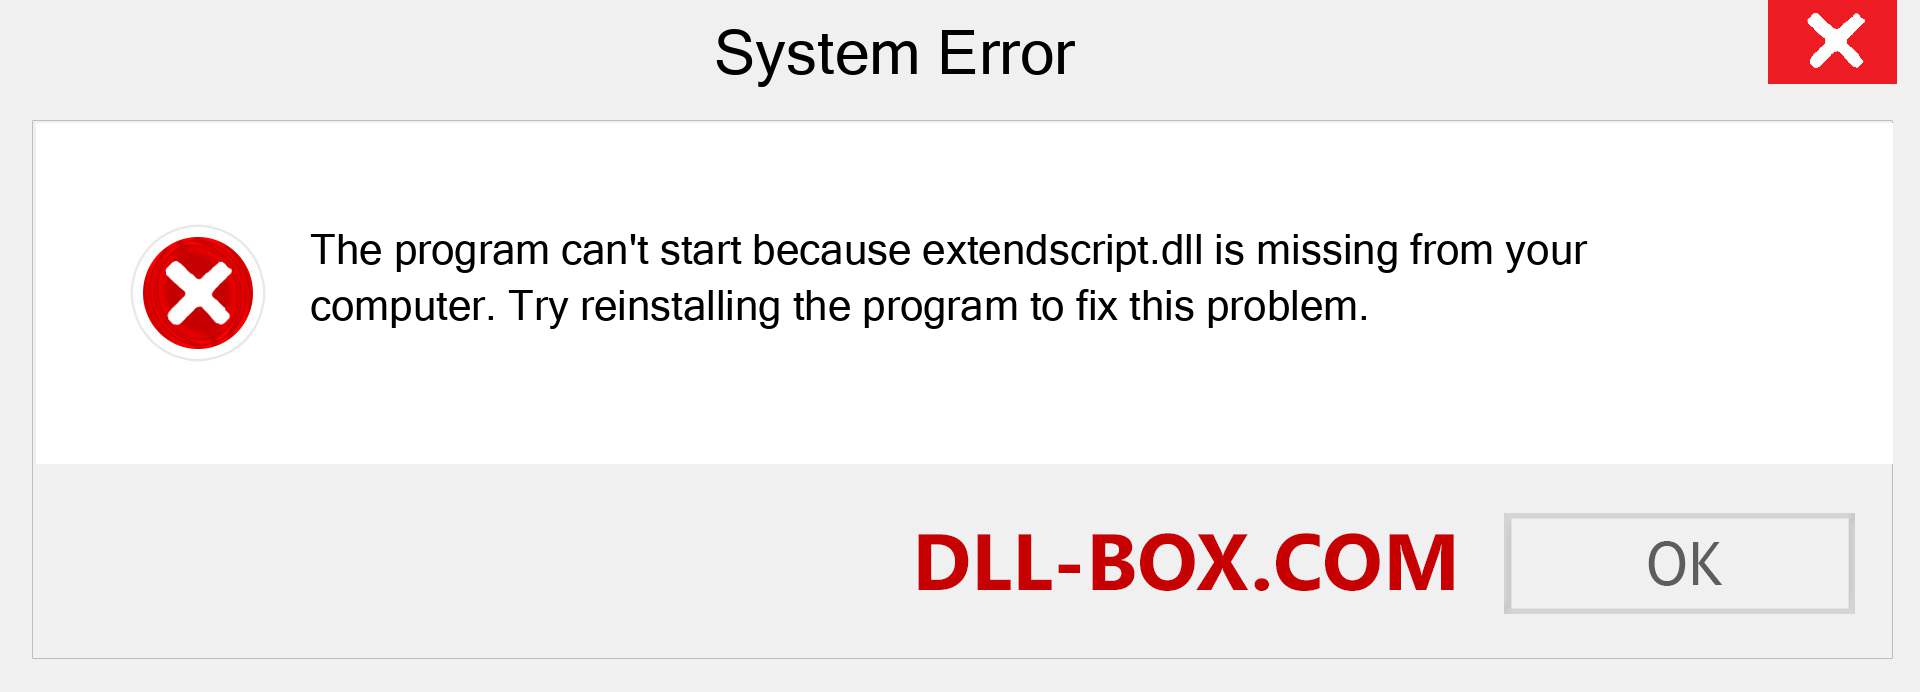  extendscript.dll file is missing?. Download for Windows 7, 8, 10 - Fix  extendscript dll Missing Error on Windows, photos, images